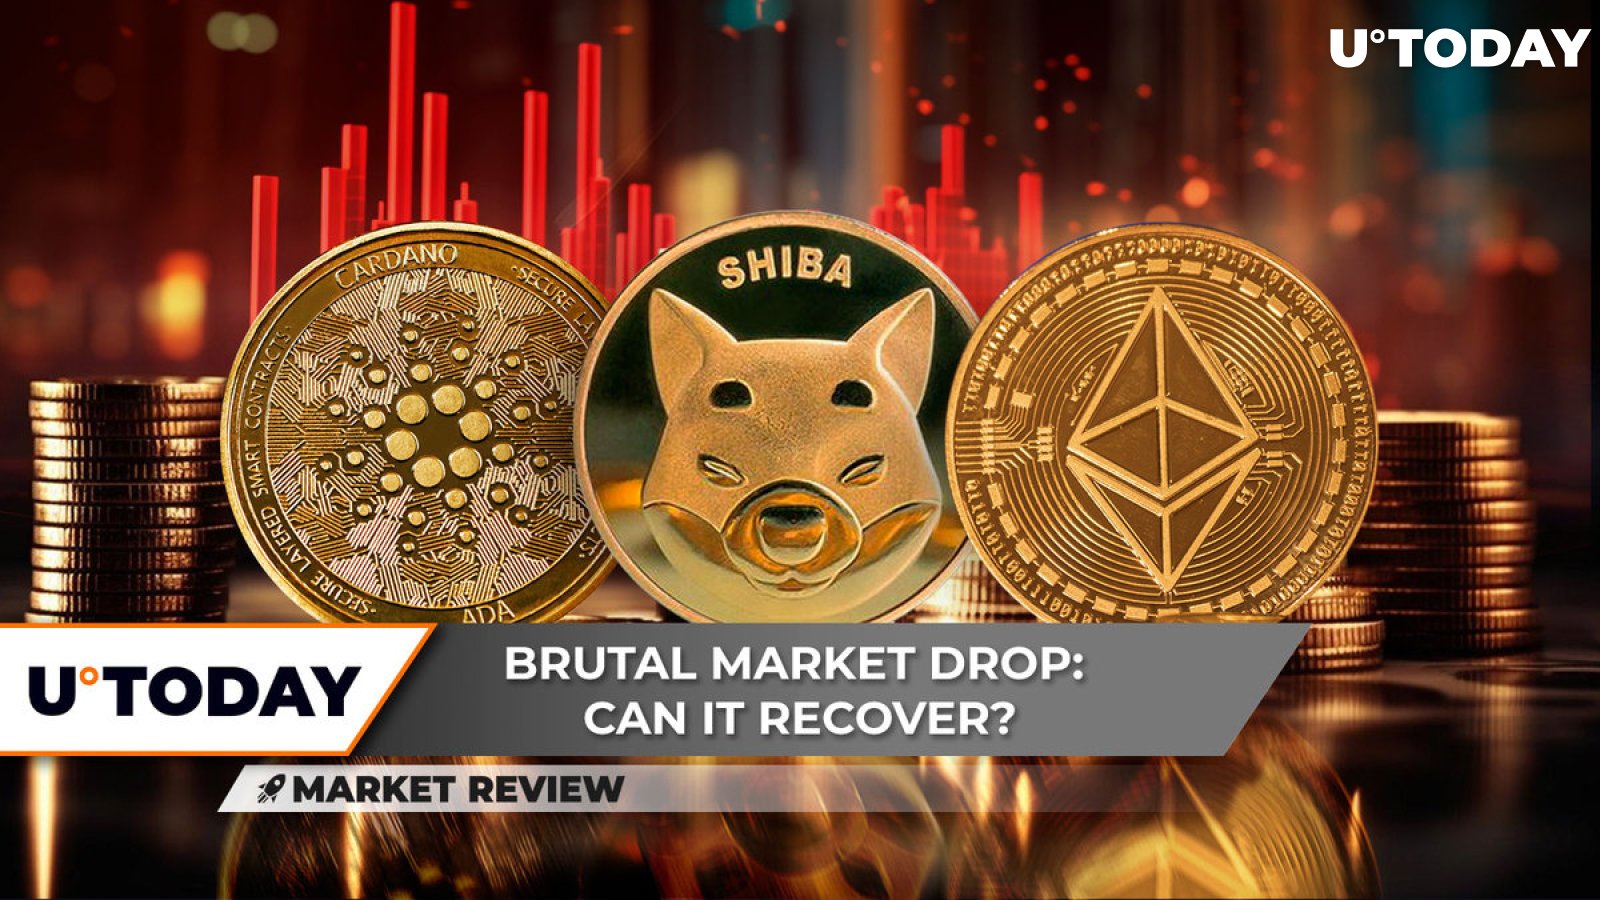 Ethereum (ETH) Secures ,000, Cardano’s (ADA) Dramatic Drop Irrelevant, Will Shiba Inu (SHIB) Recover After 30% Plunge?